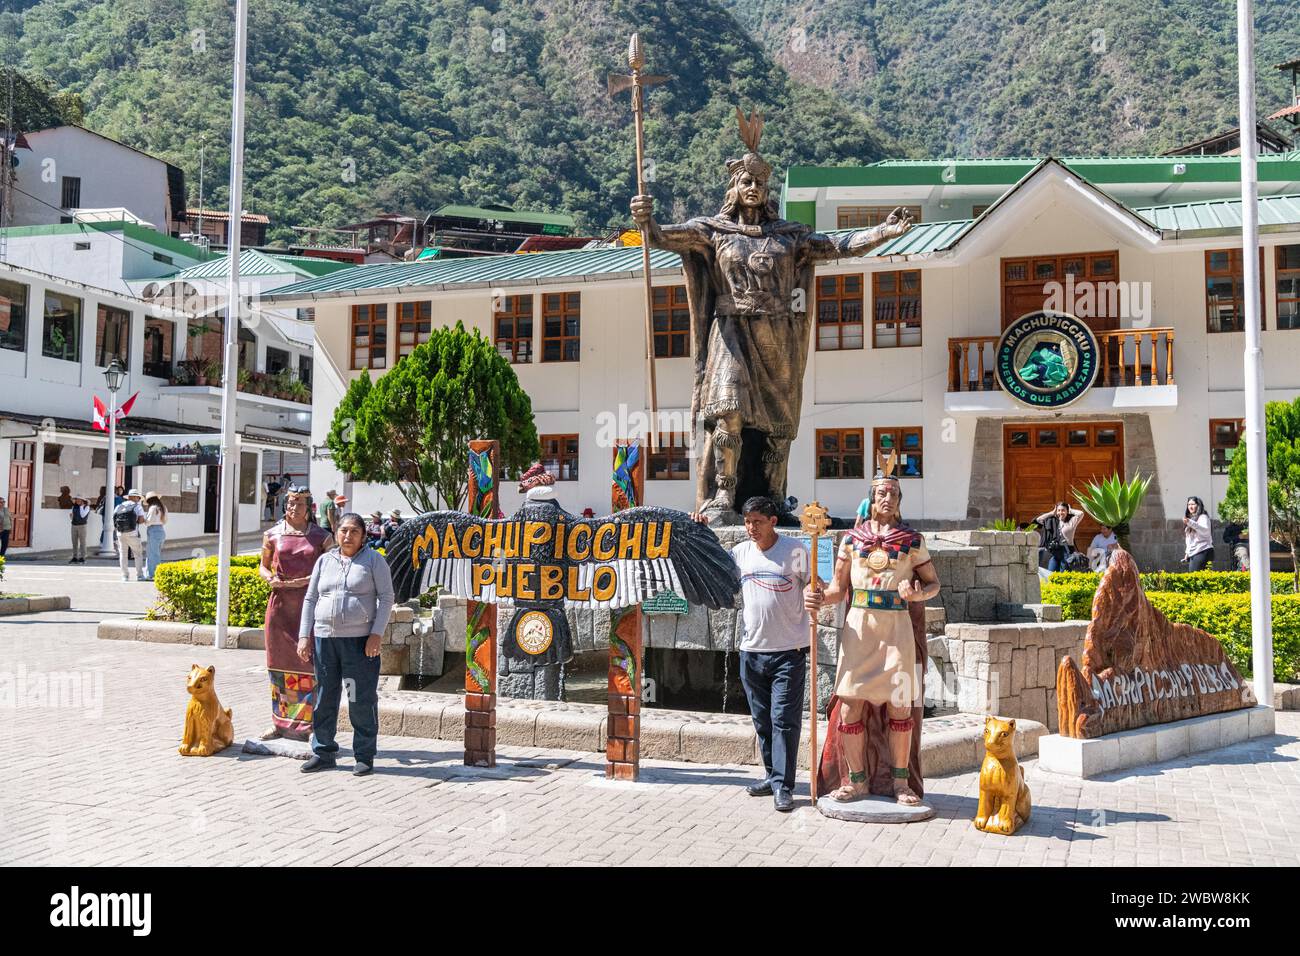 The statue of Inca Emperor Pachacutec / Pachacuti in the main square plaza of the town of Aguas Calientes near Machu Picchu in Peru Stock Photo